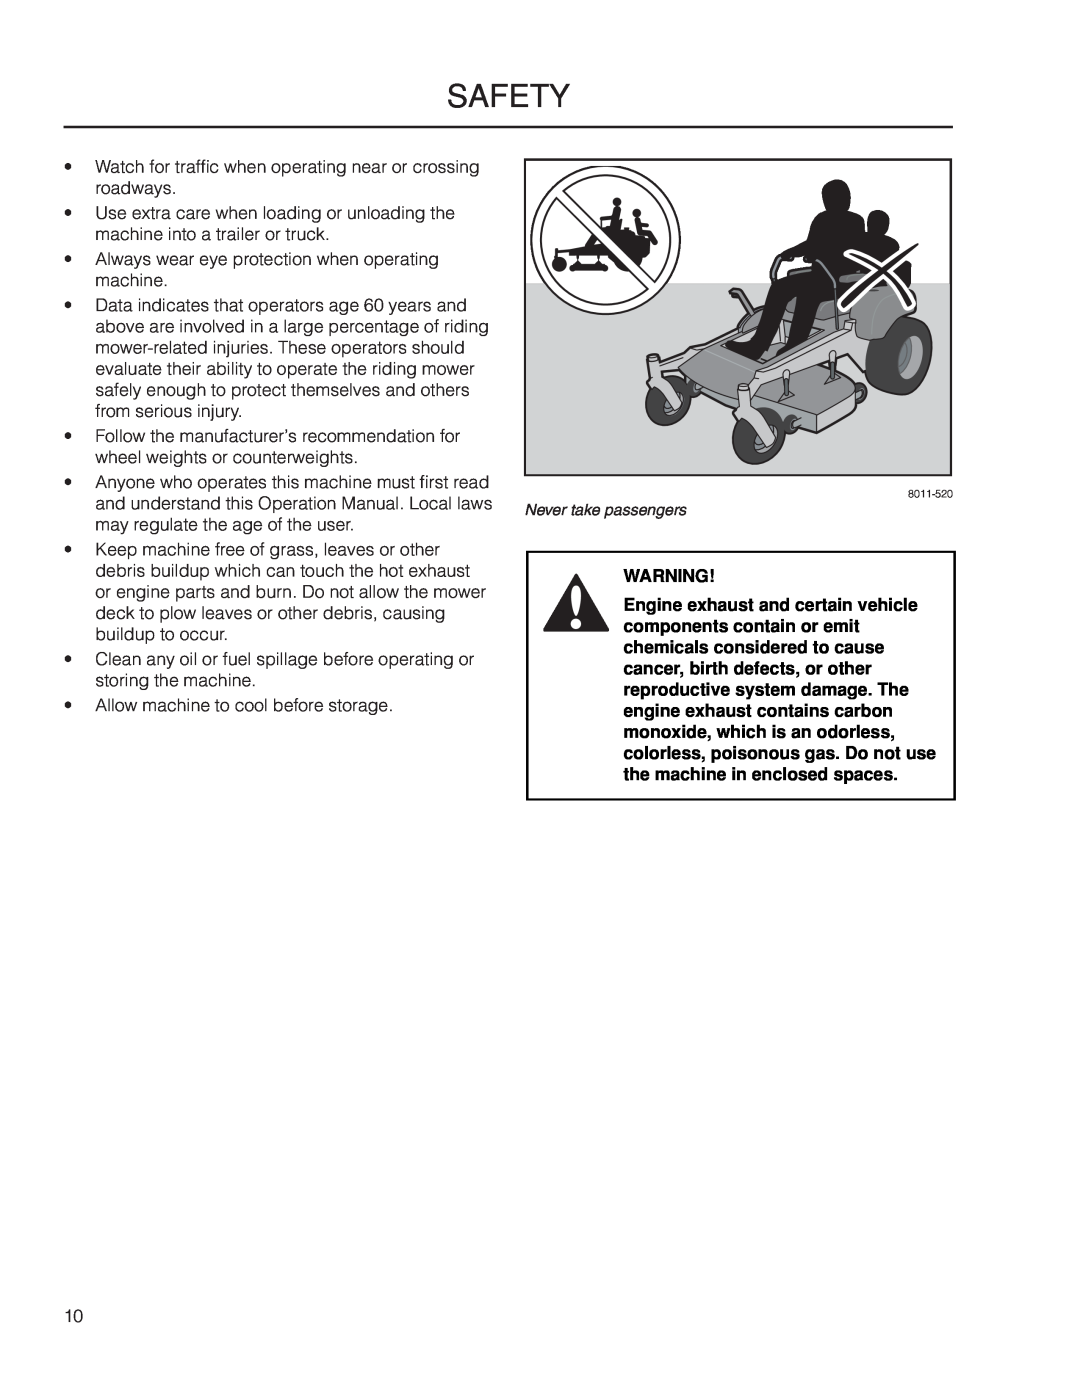 Husqvarna 966062201, 966061401, 966060901, 966061201 manual Safety, Watch for traffic when operating near or crossing roadways 